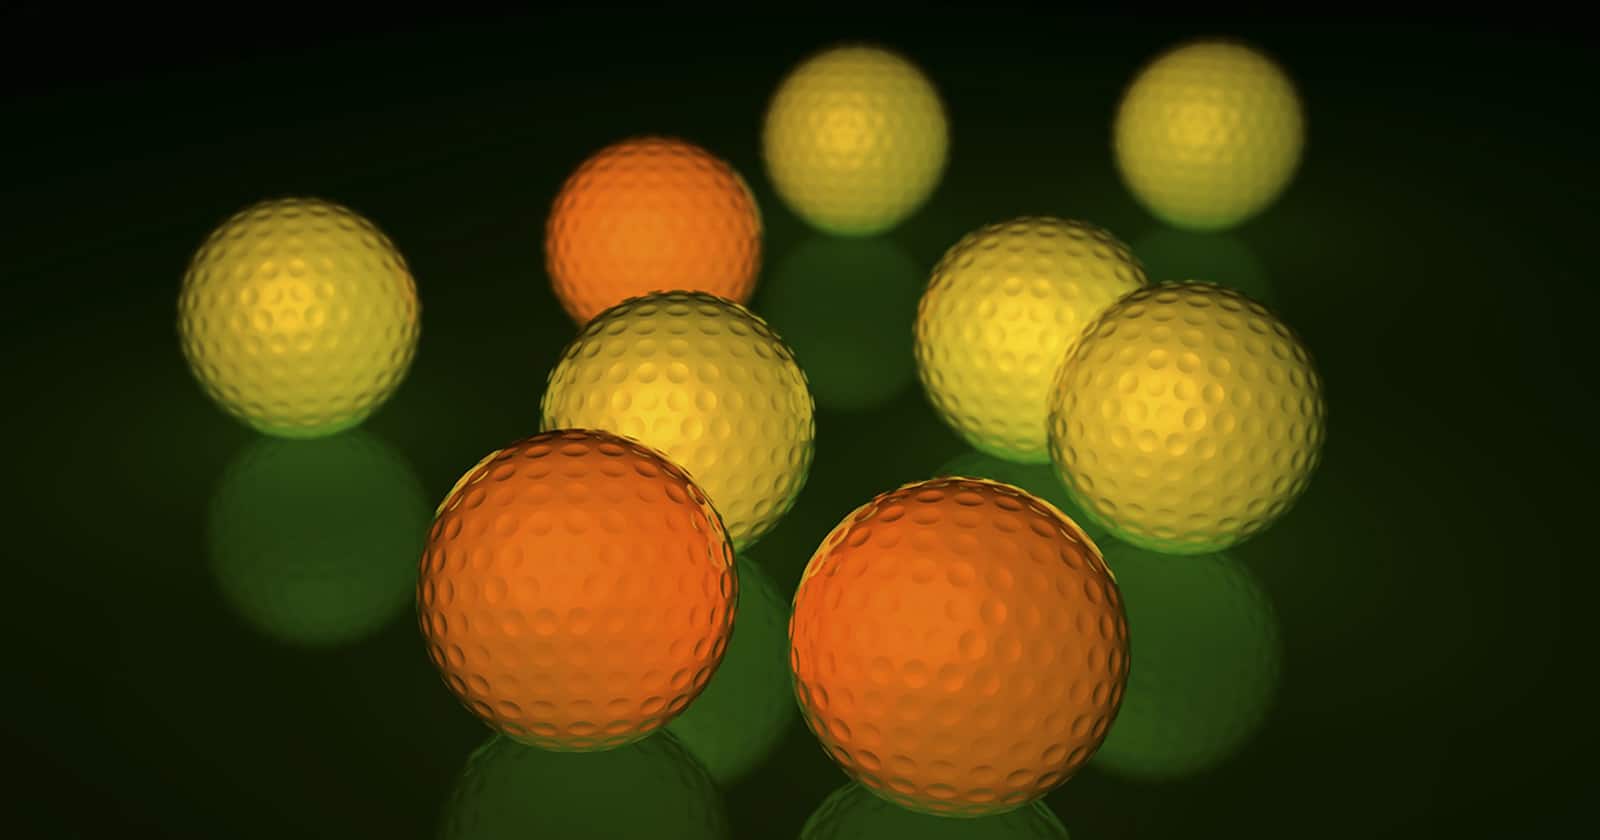 how to make glow in the dark golf balls